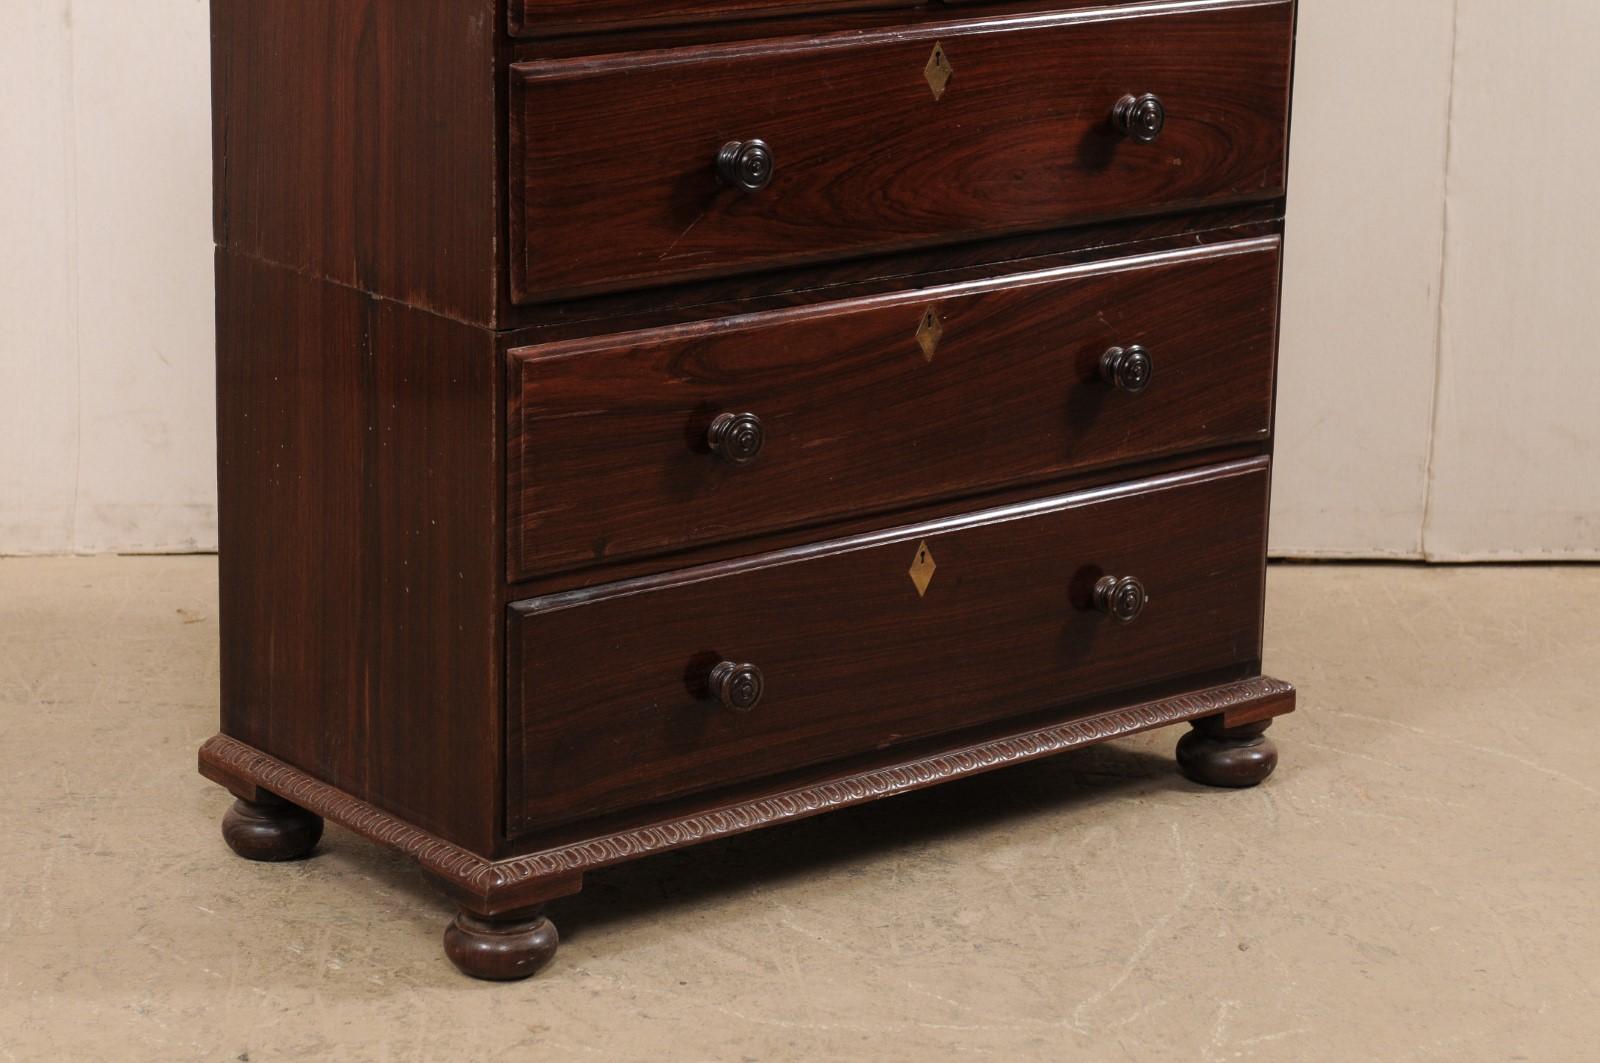 British Colonial Rosewood Chest of Drawers w/ Egg-n-Dart Trim, Early 20th C In Good Condition For Sale In Atlanta, GA